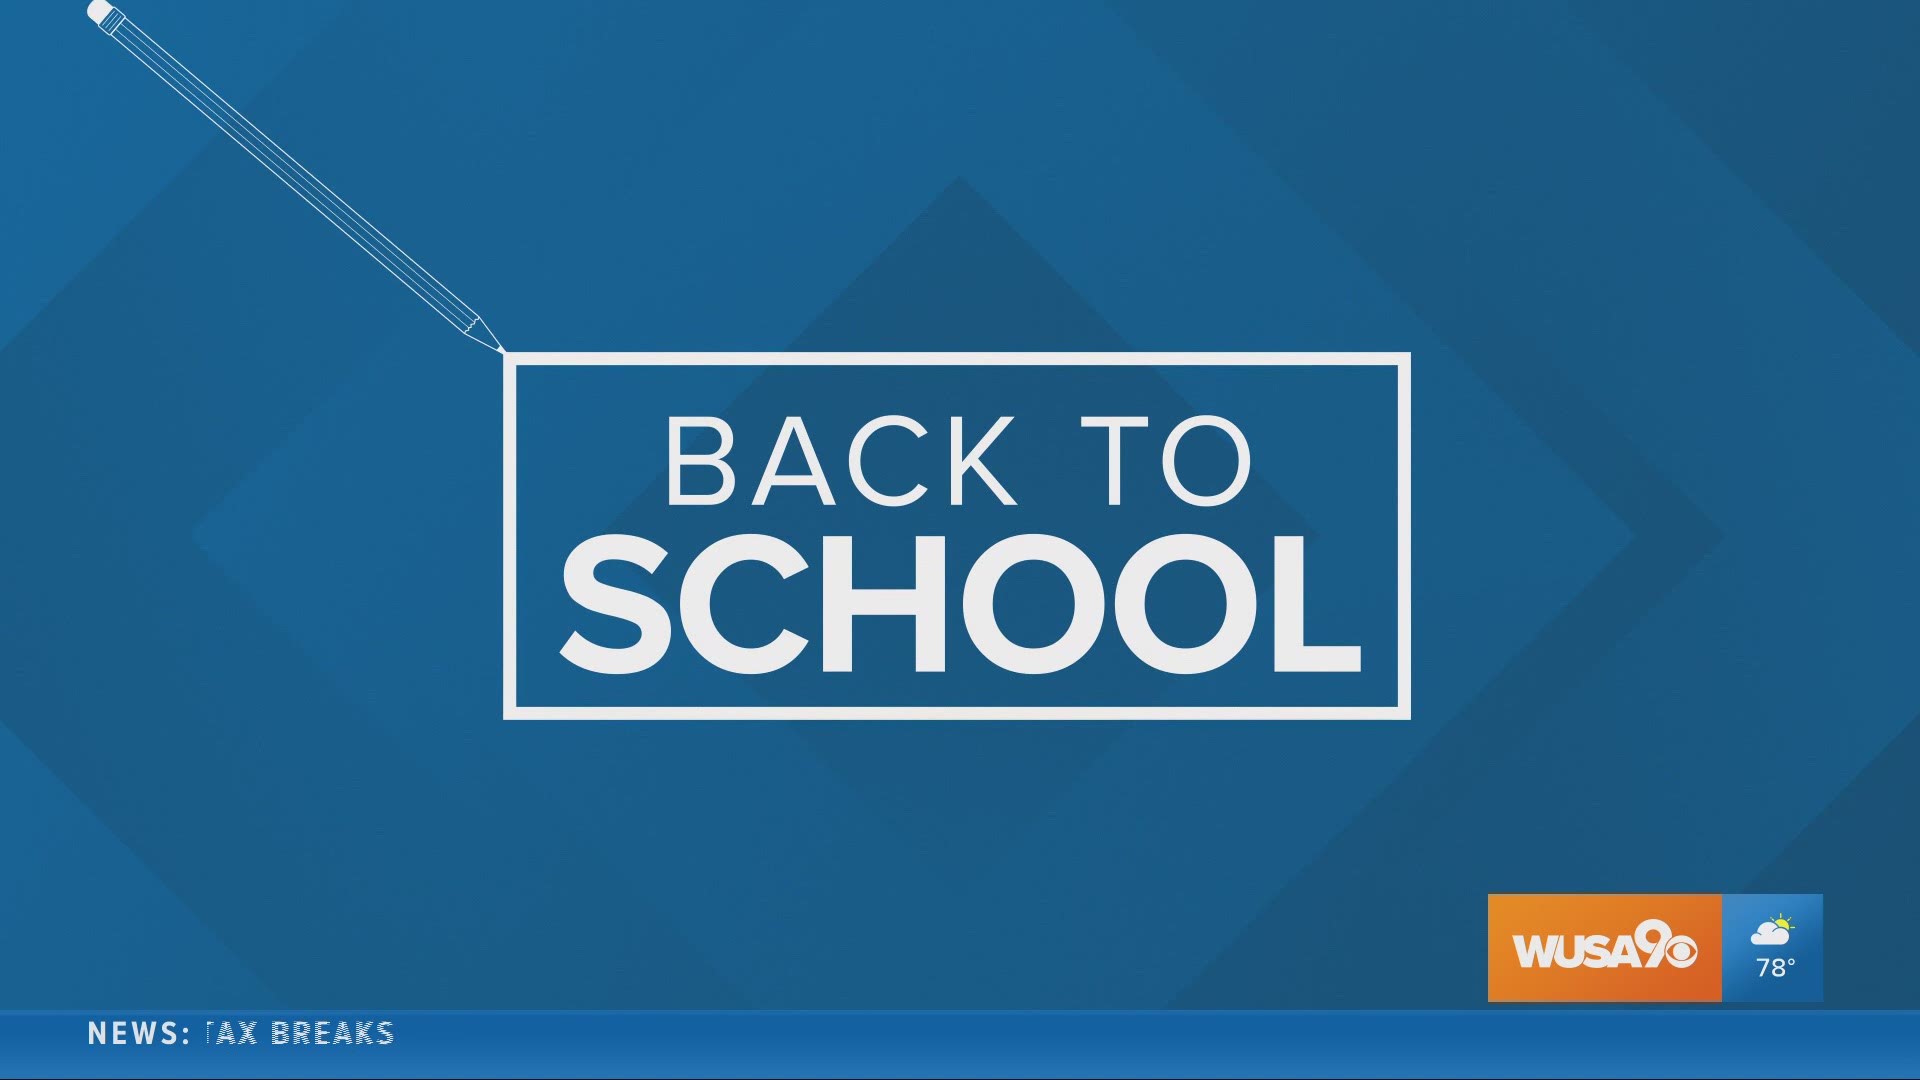 Lifestyle expert Limor Suss shares the best back-to-school essentials to have us looking and feeling great. This segment is sponsored by LS Media.